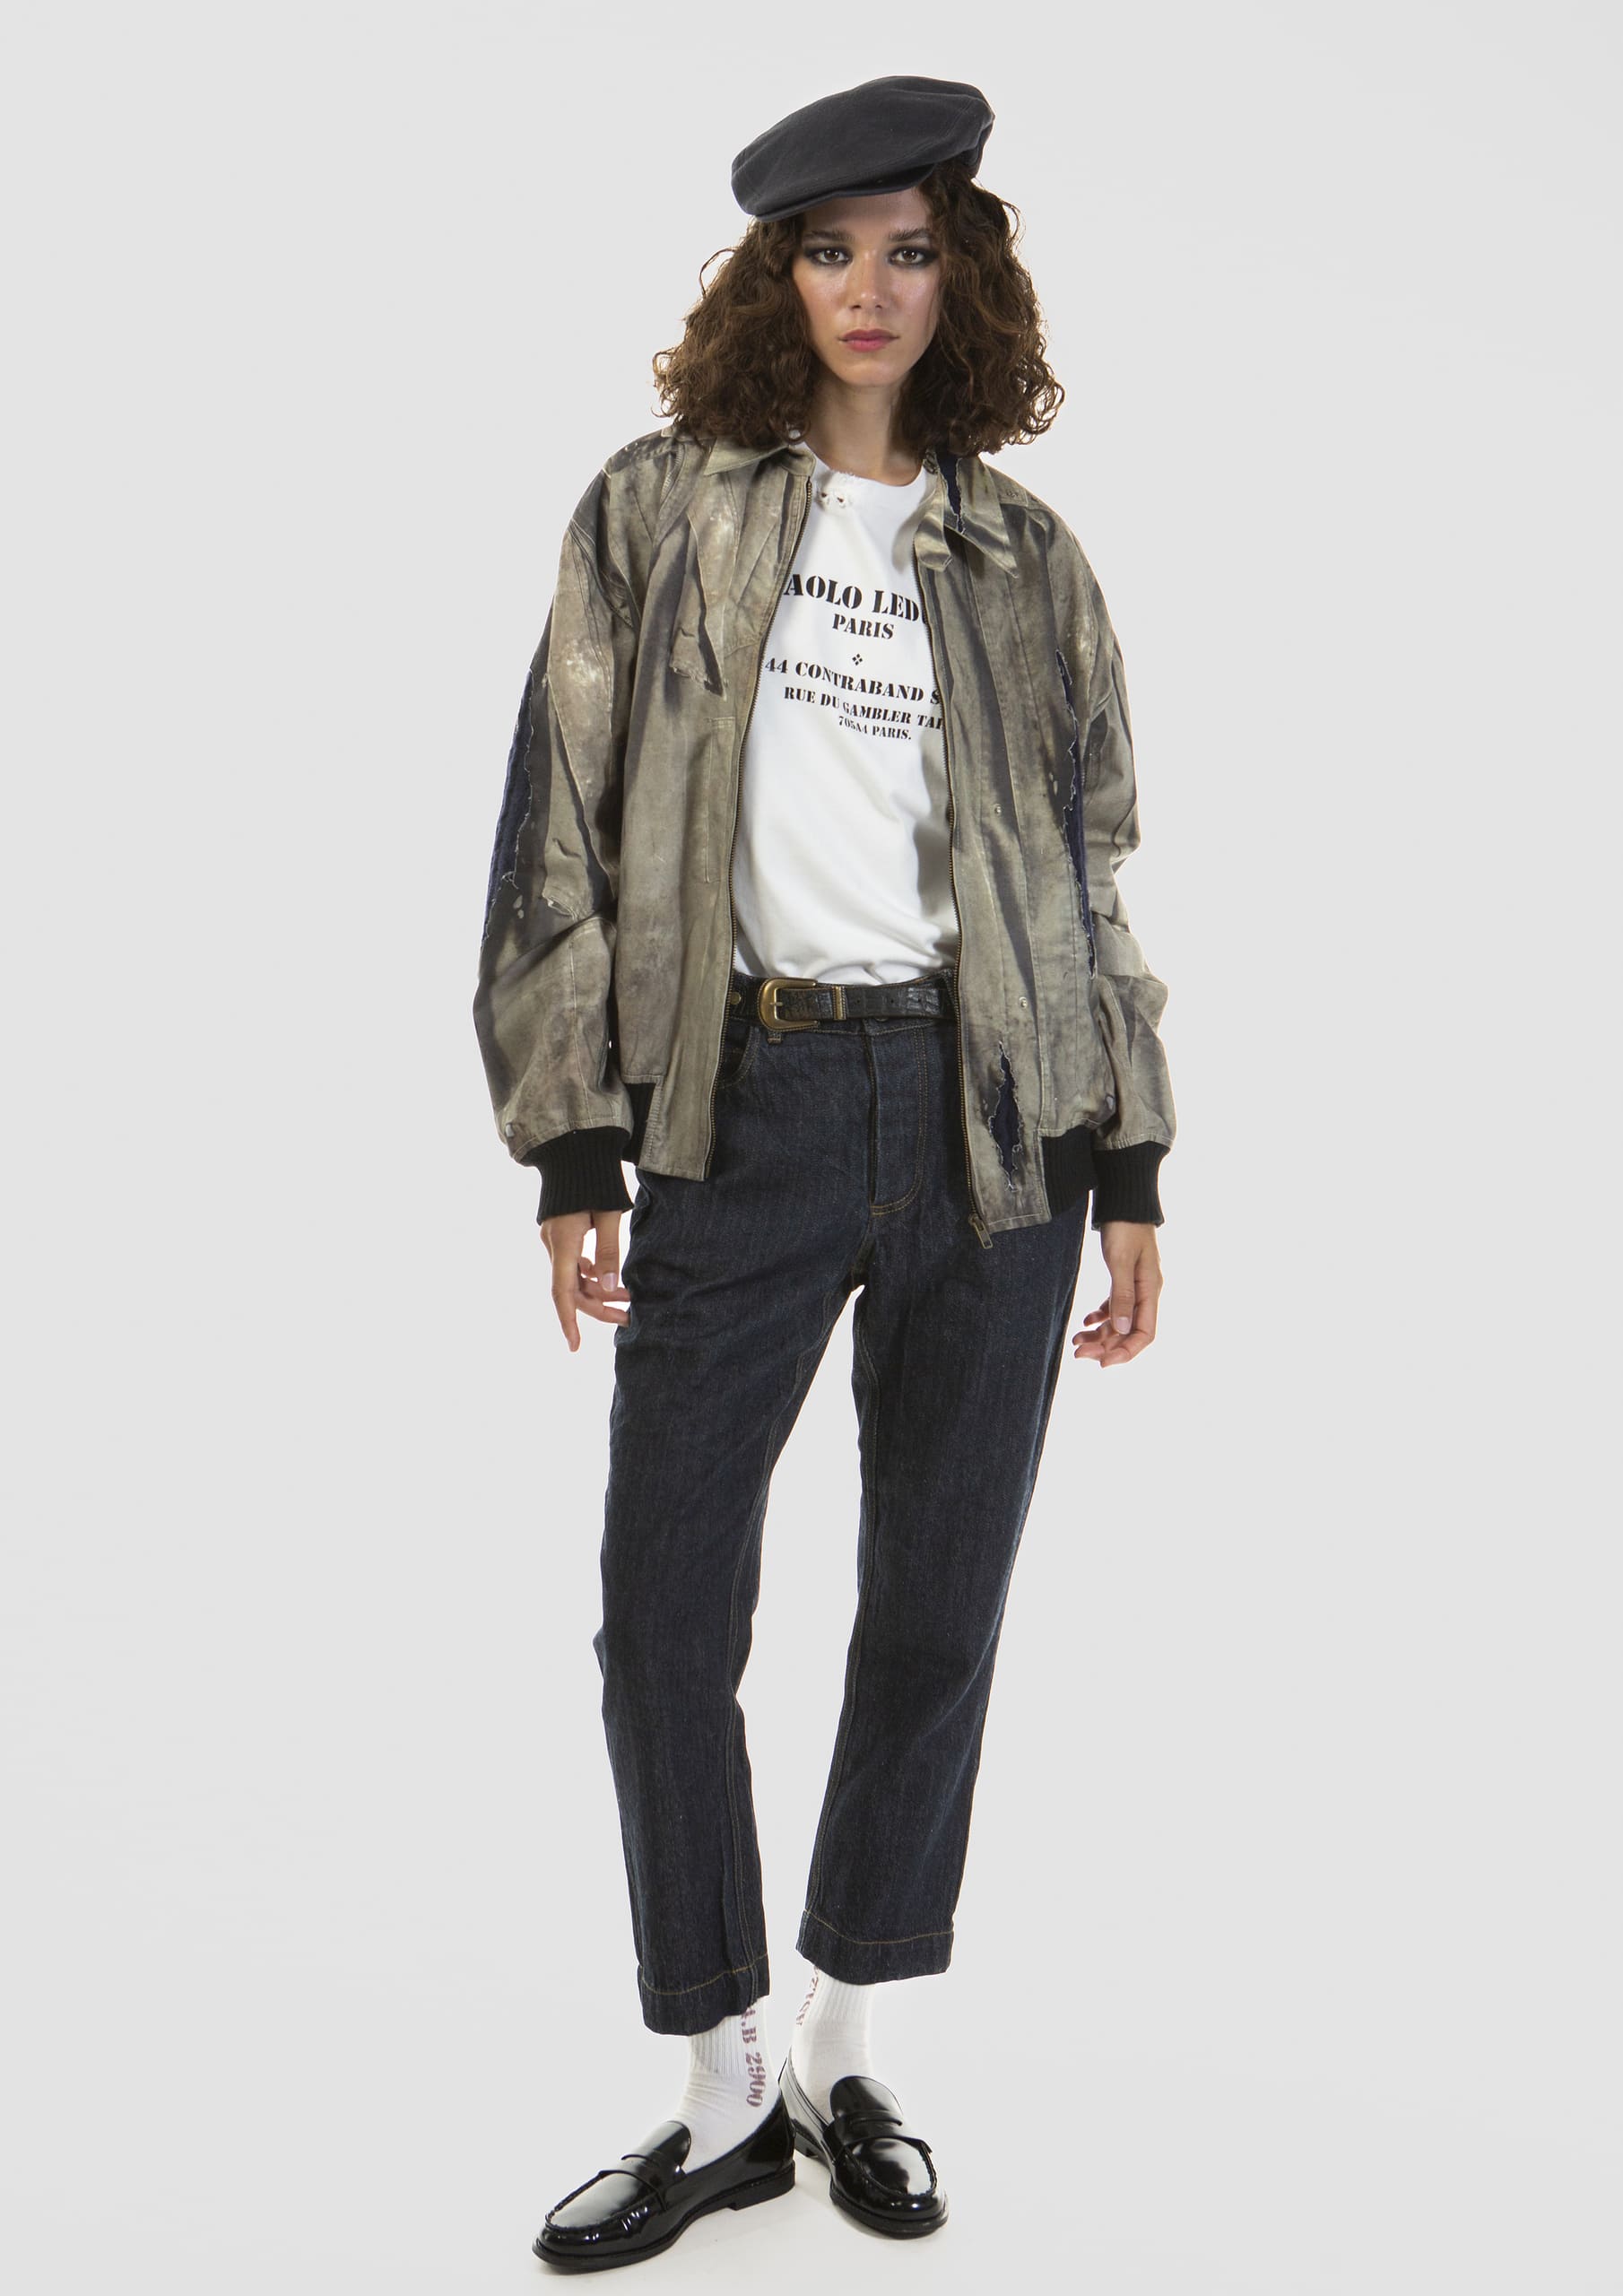 after-the-fire-bomber-jacket-02